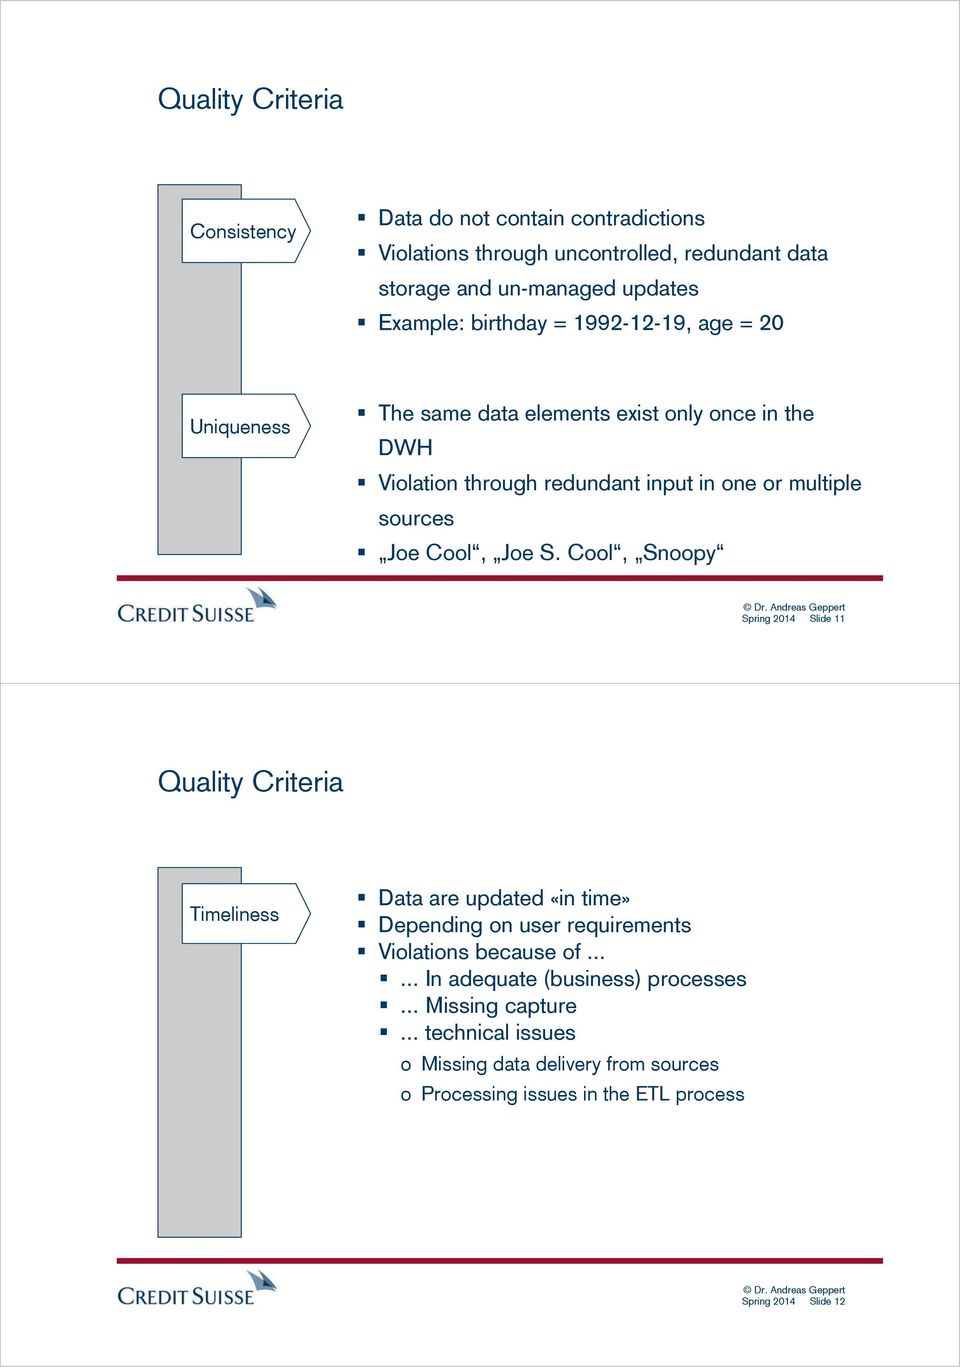 Cool, Joe S. Cool, Snoopy Spring 2014 Slide 11 Quality Criteria Timeliness Data are updated «in time» Depending on user requirements Violations because of.